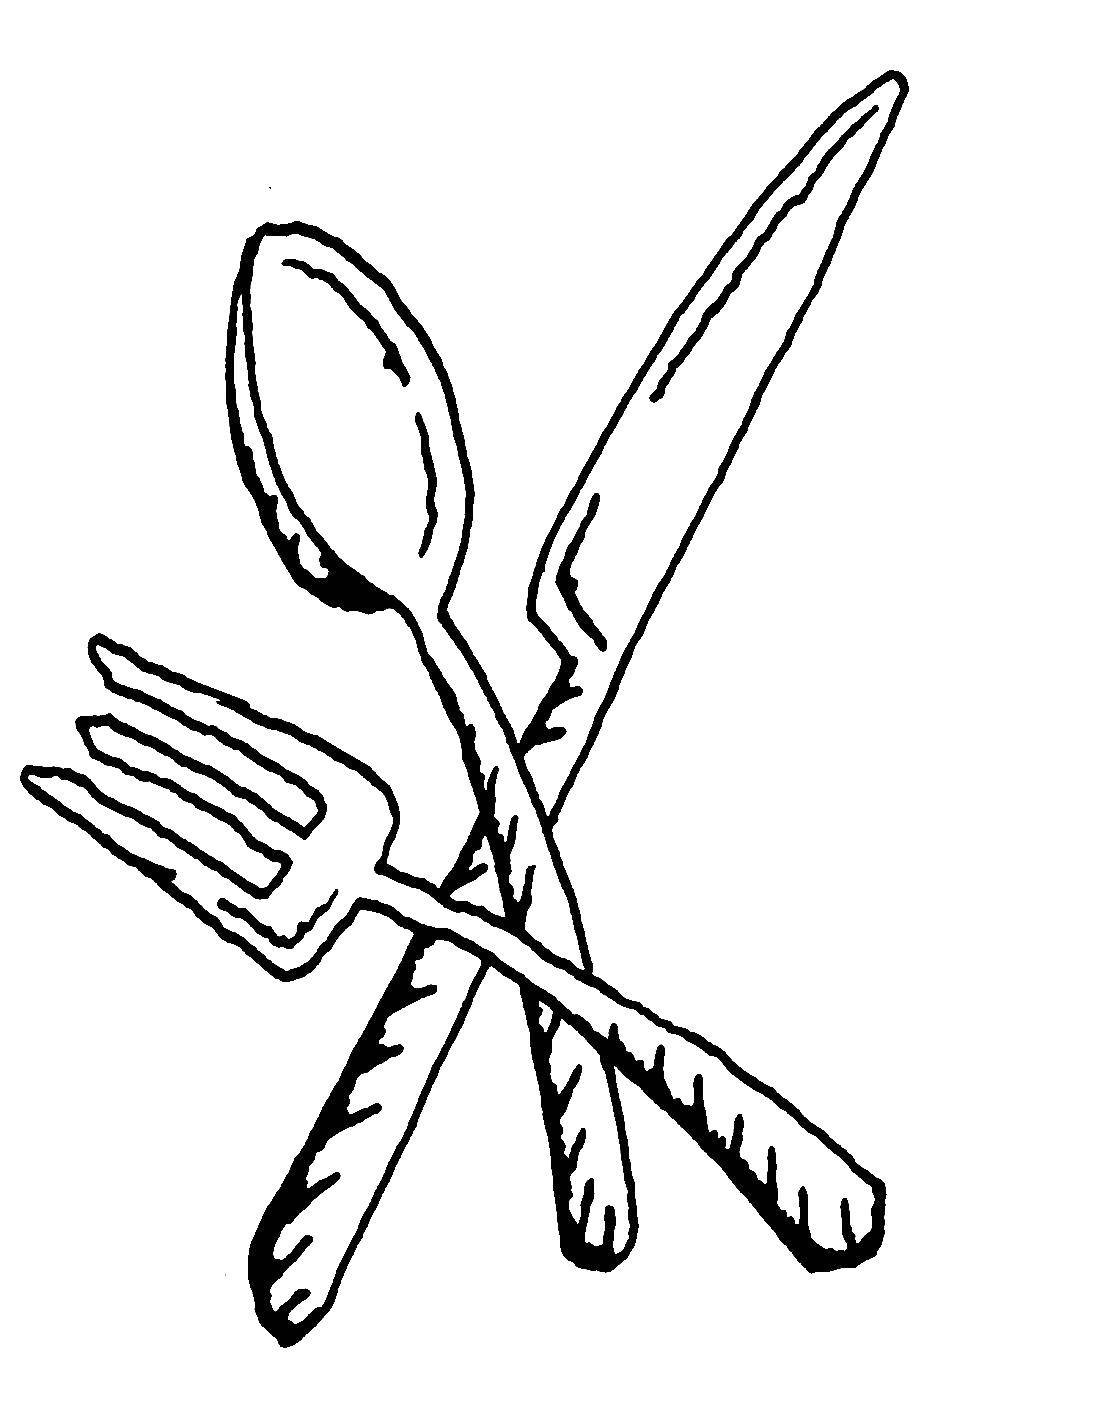 Coloring Cutlery. Category knife. Tags:  Crockery, Cutlery.